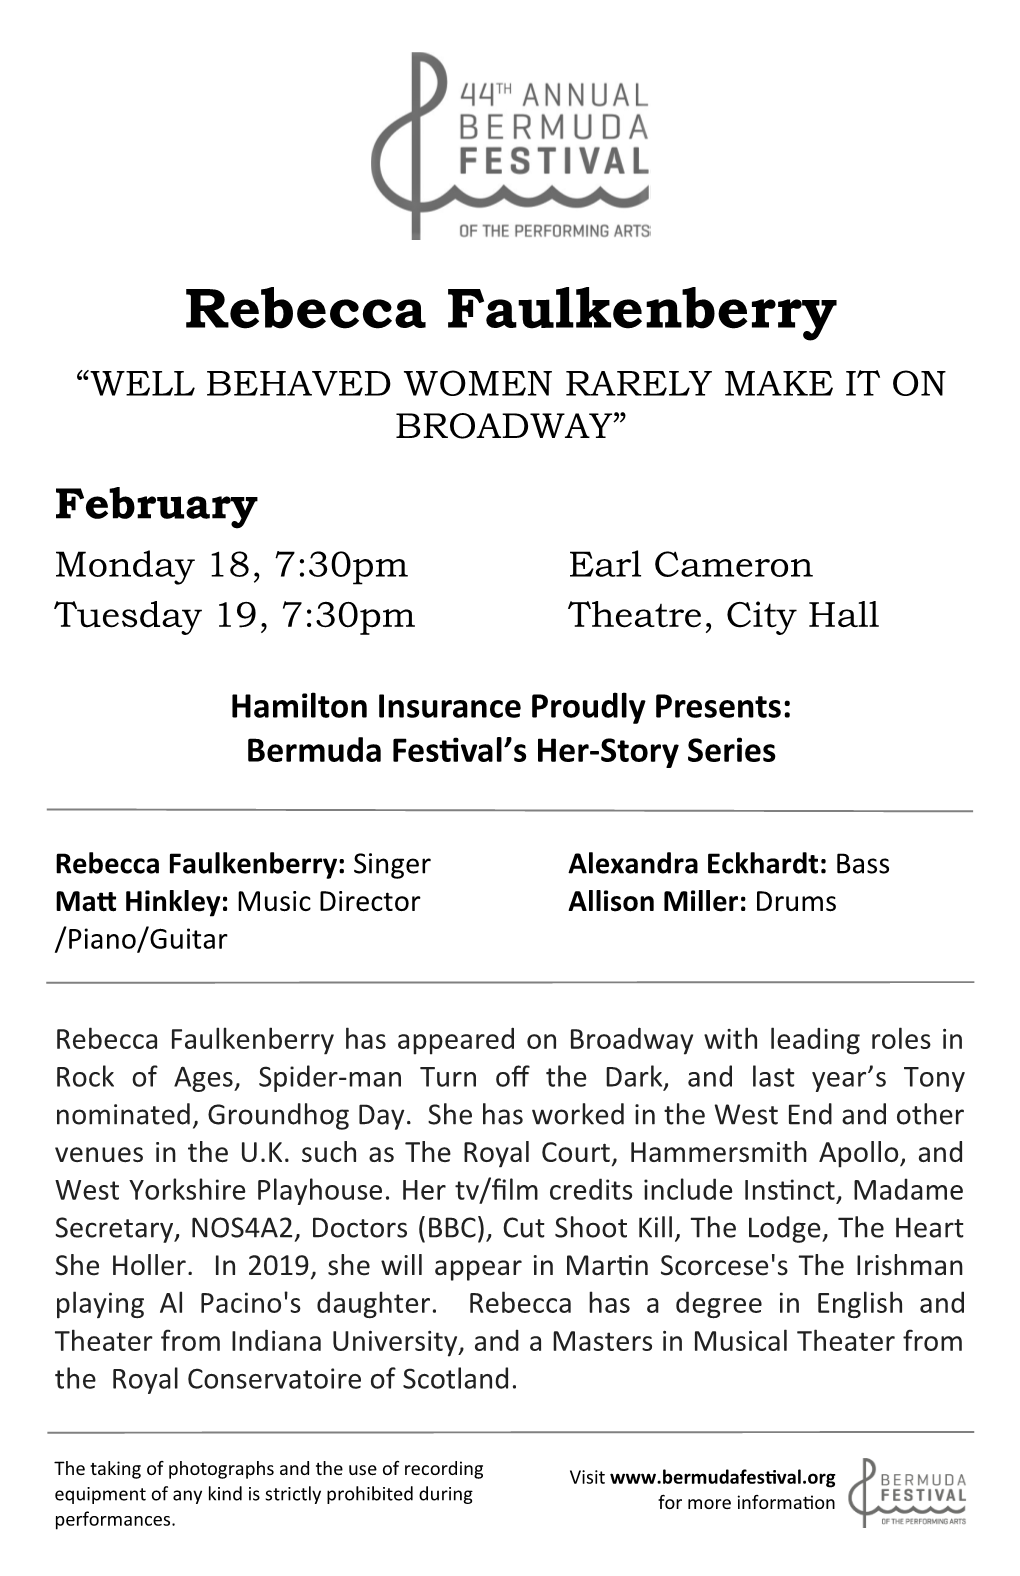 Rebecca Faulkenberry “WELL BEHAVED WOMEN RARELY MAKE IT on BROADWAY” February Monday 18, 7:30Pm Earl Cameron Tuesday 19, 7:30Pm Theatre, City Hall